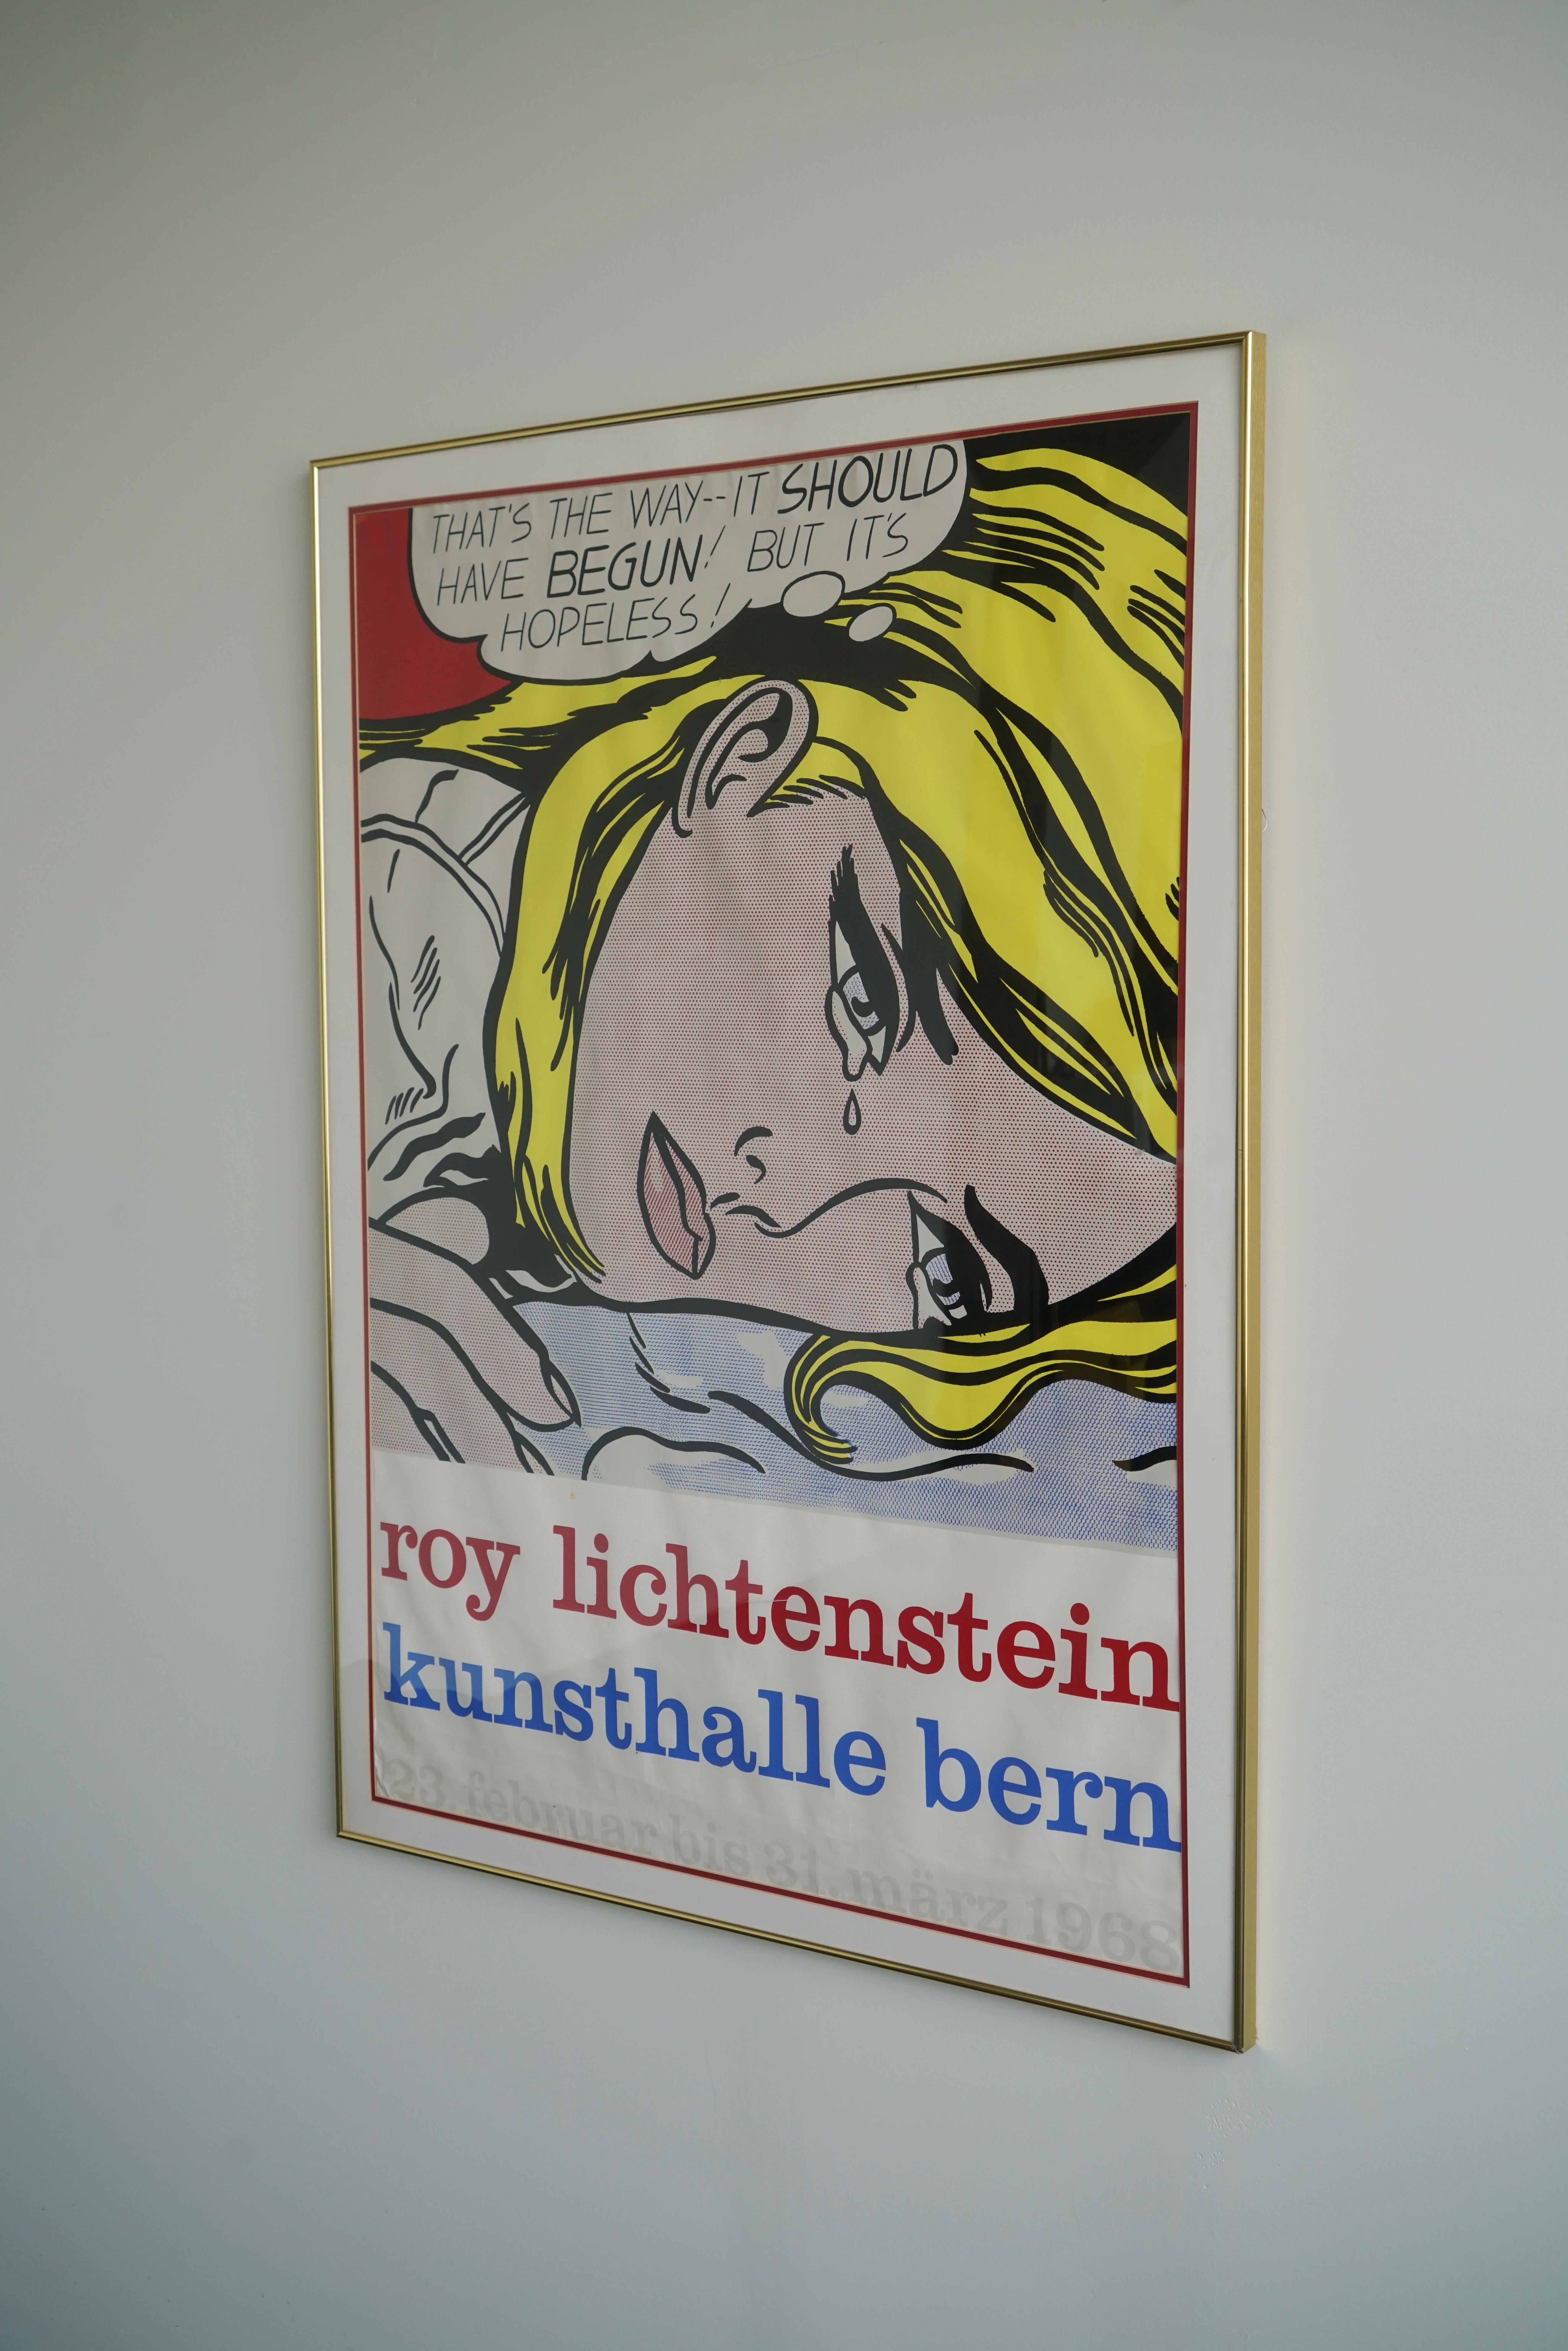 Roy Lichtenstein Kunsthalle Bern exhibition poster

Serigraph, ca. 1968

Framed

Dimensions:

49.5” x 34.5”

Frame: 53.5” x 39.5” 

Condition: Overall good vintage condition. A few minor crinkles on paper.